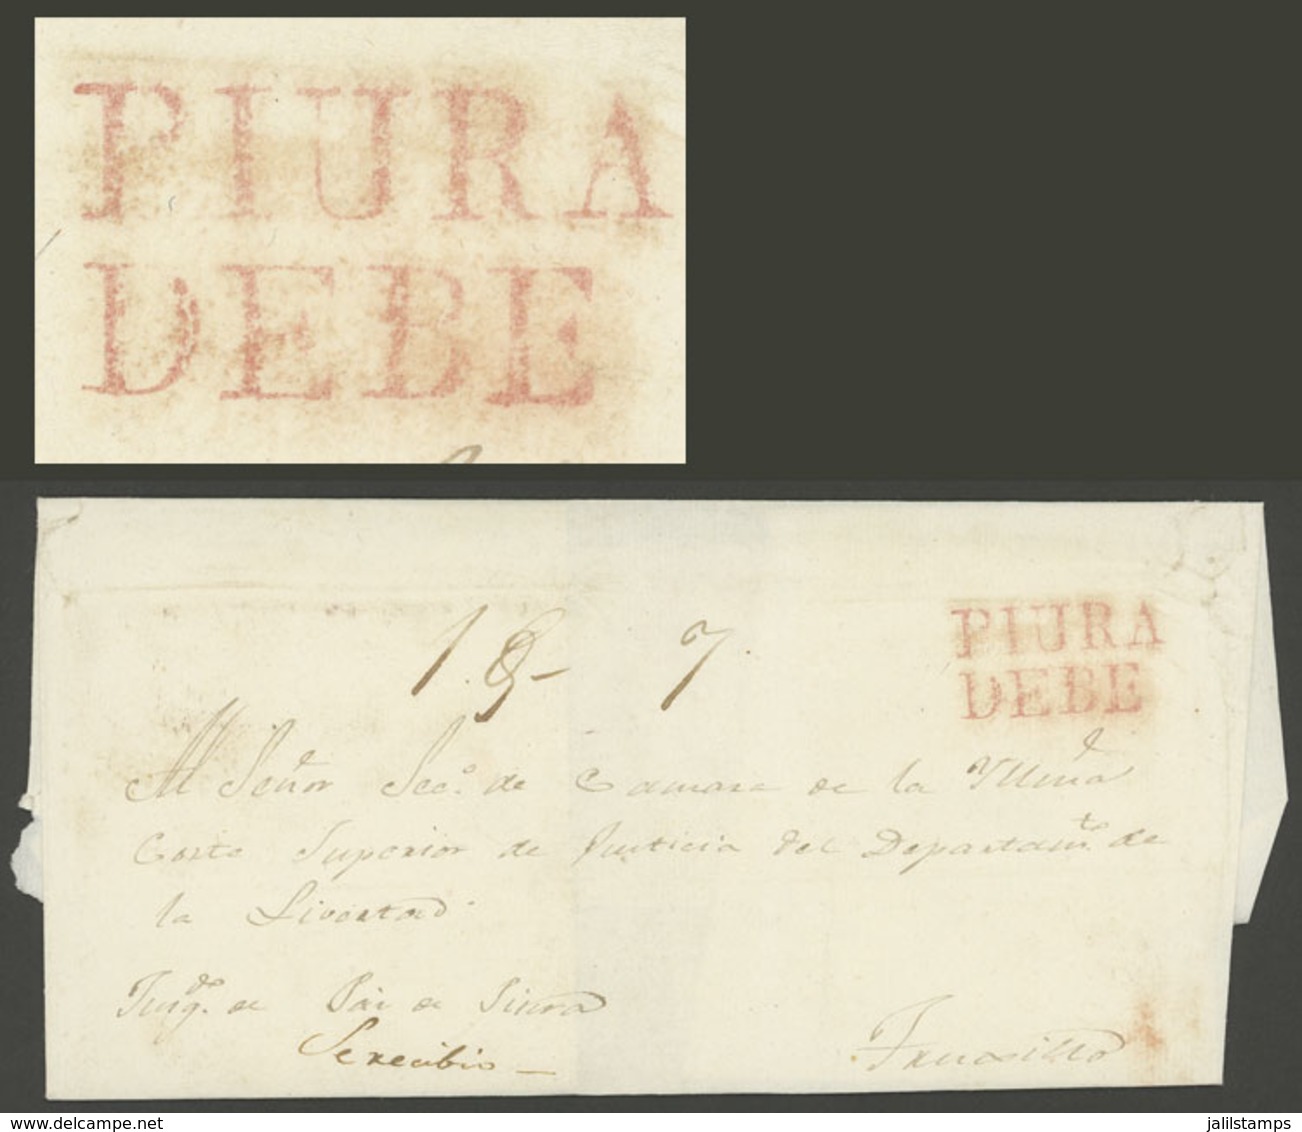 PERU: Folded Cover Dated 8/SE/1840 And Sent To Trujillo, With 2-line PIURA DEBE Mark In Red, Excellent Quality, Rare! - Perú